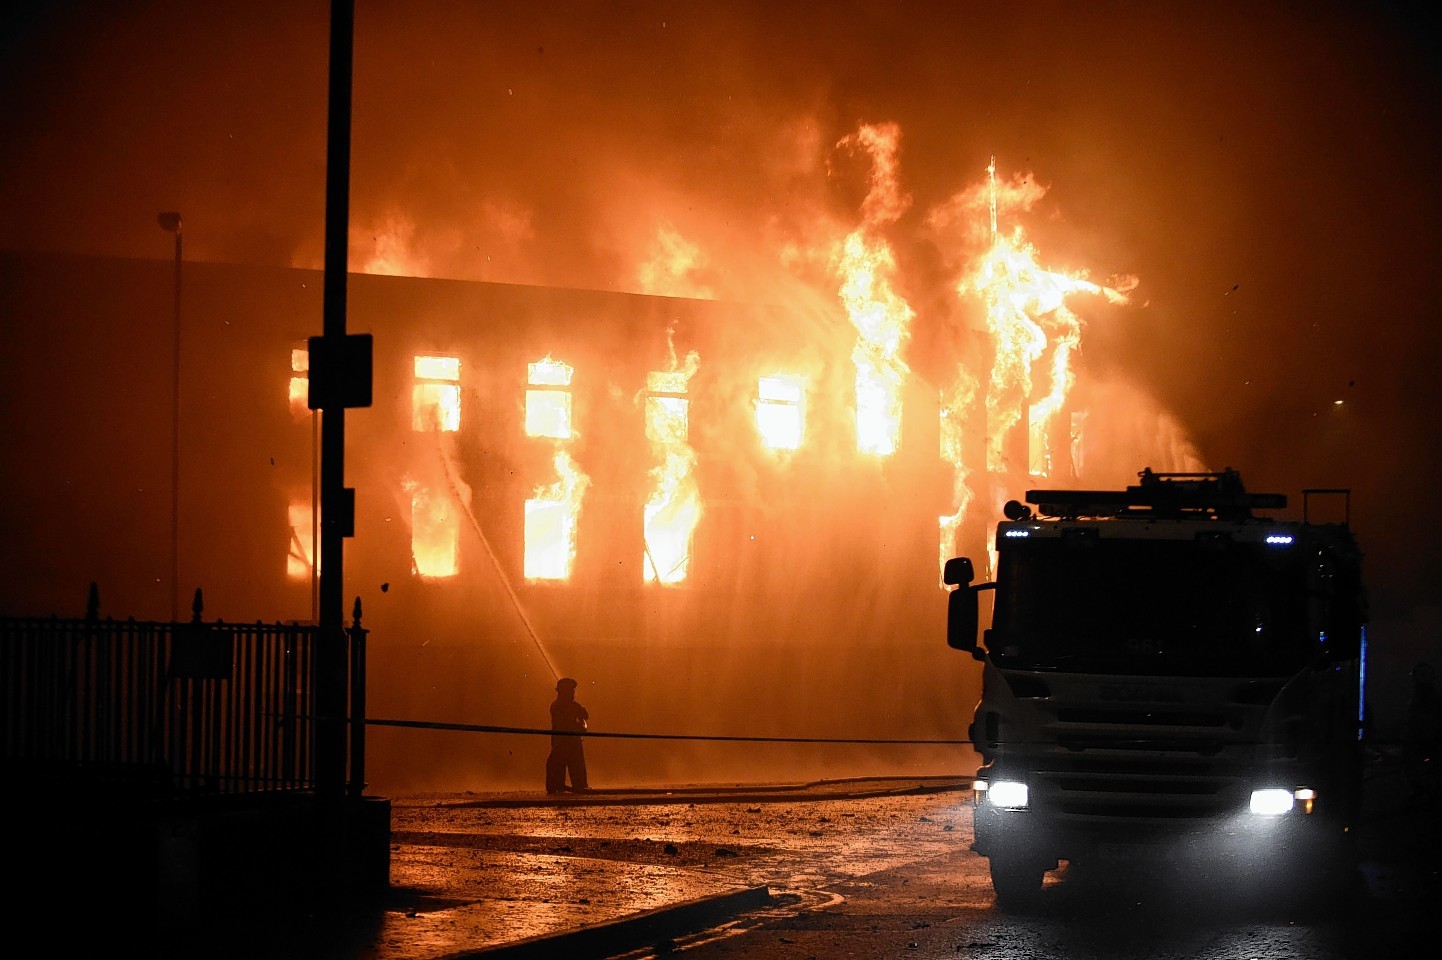 Fire crews have been tackling the blaze since 3pm this afternoon